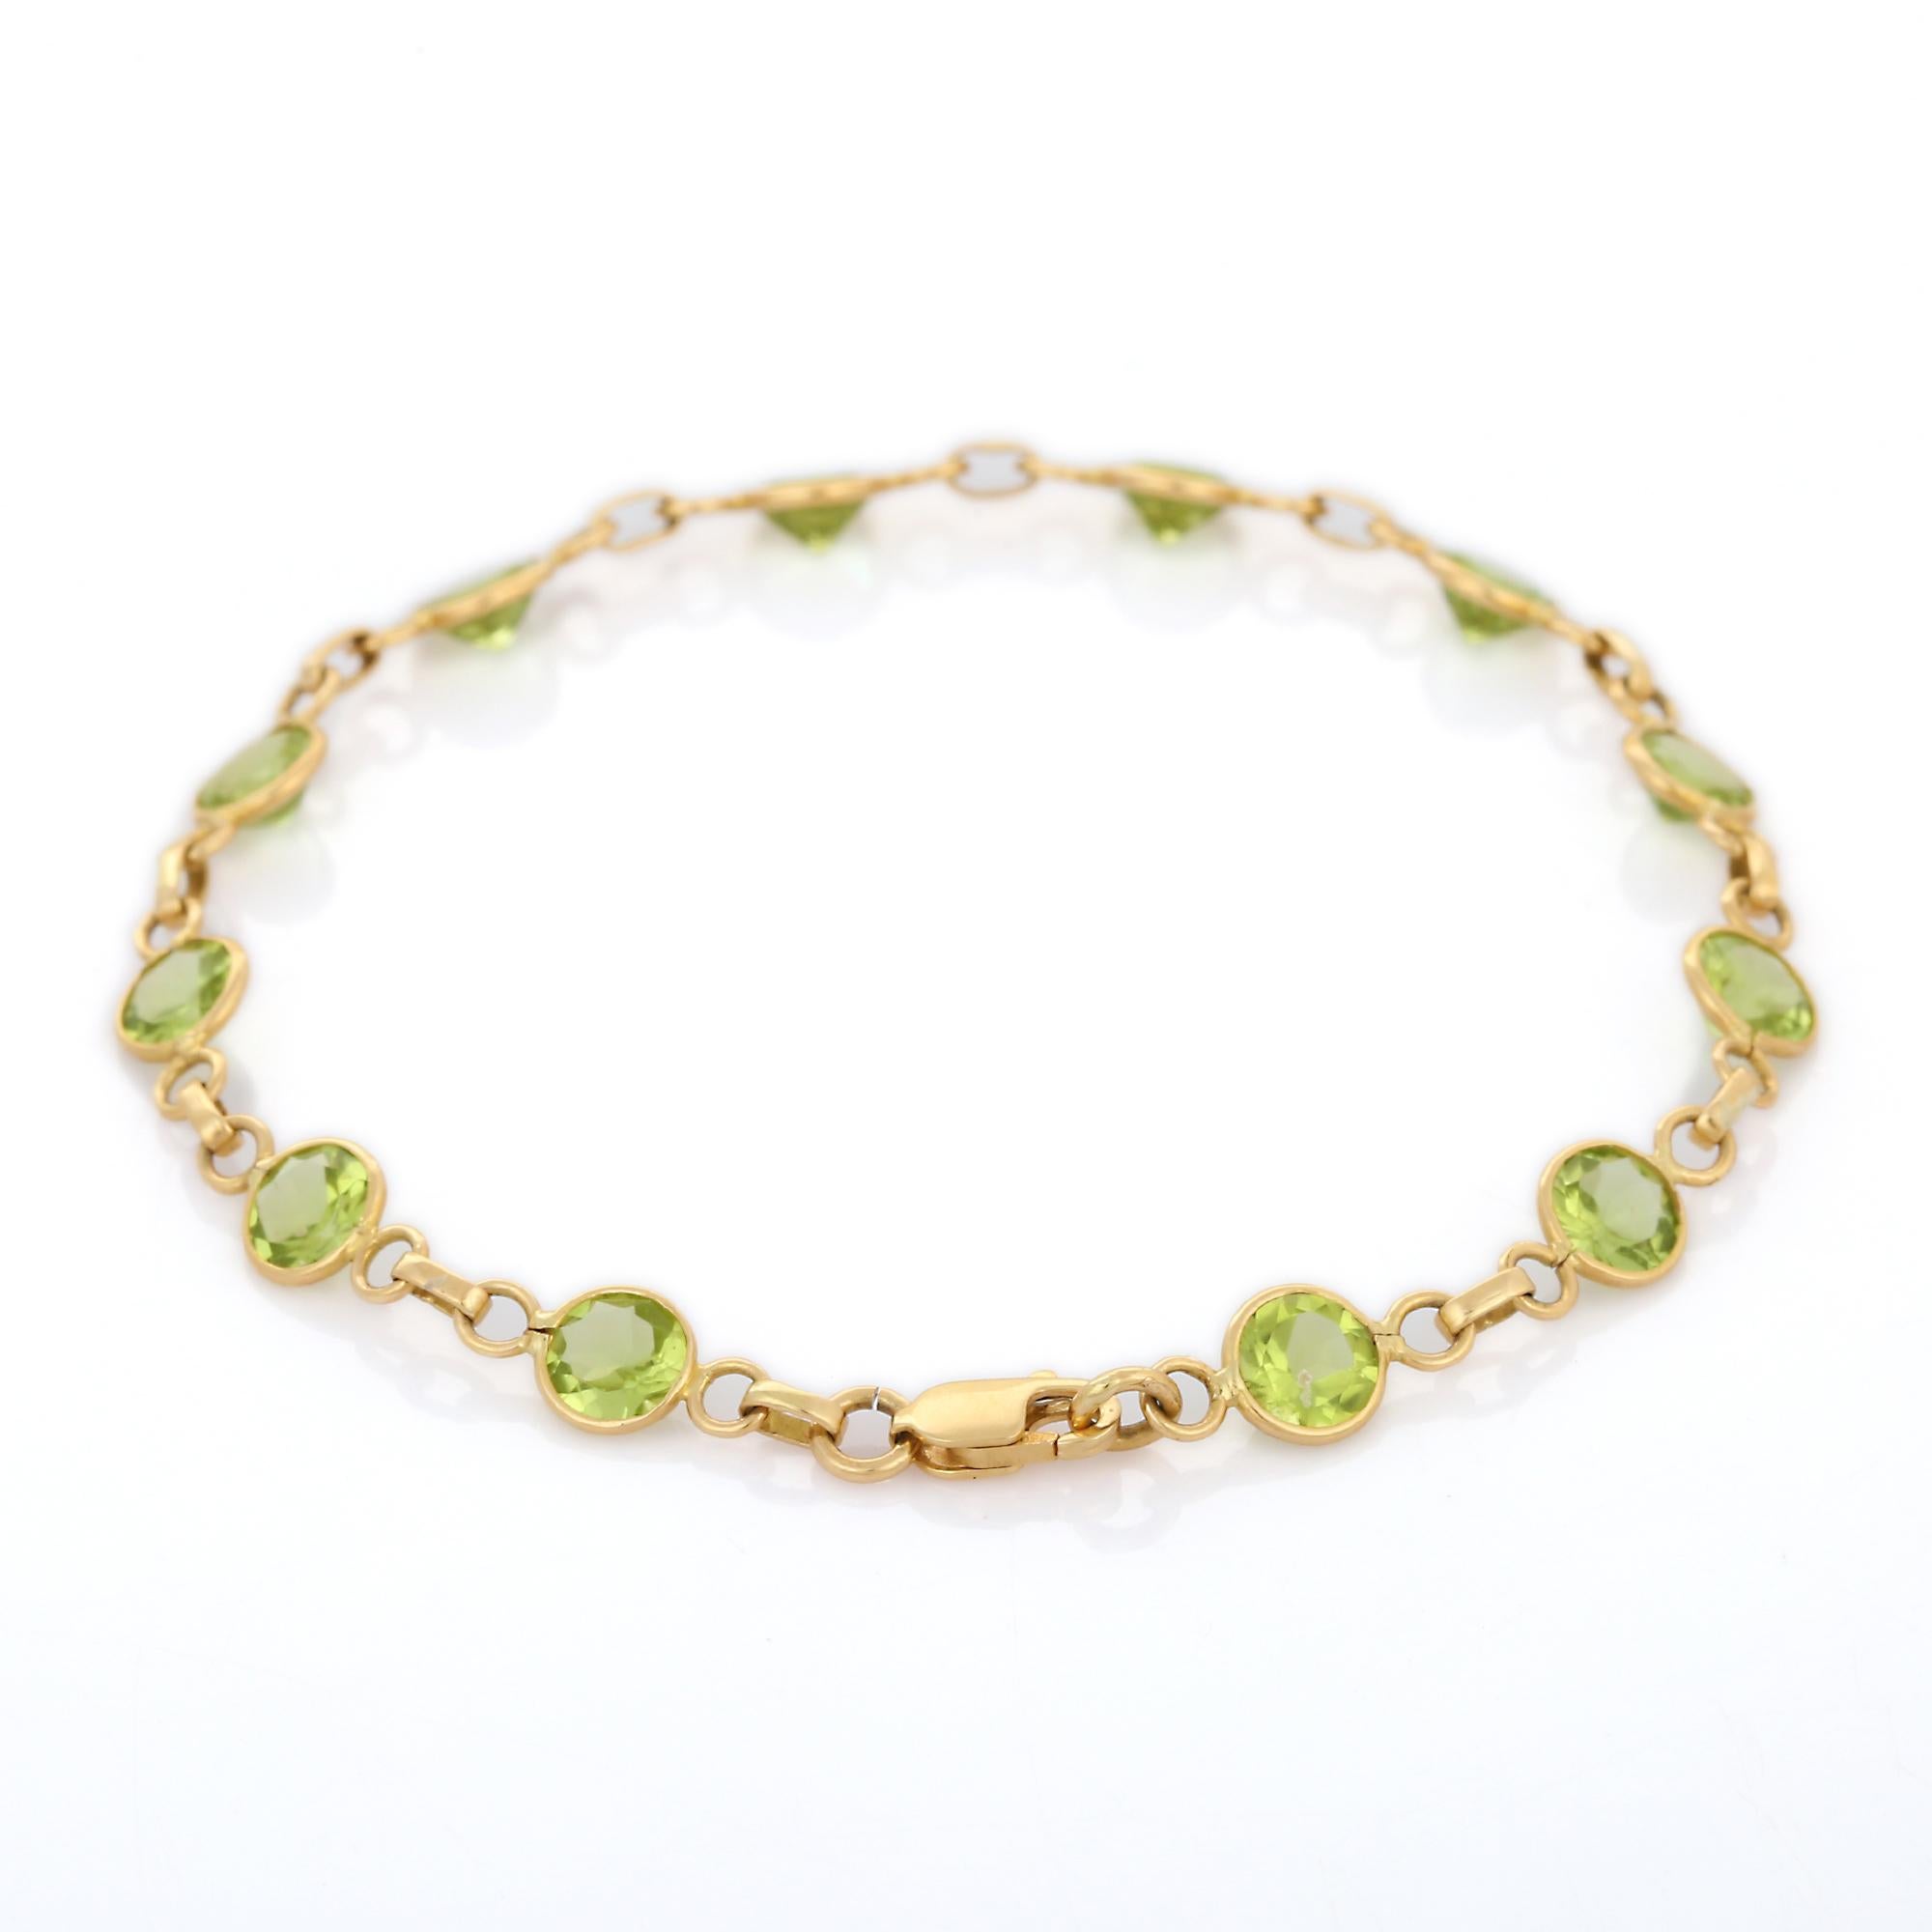 Modern 18 Karat Solid Yellow Gold Mounted Peridot Gemstone Link Chain Bracelet In New Condition For Sale In Houston, TX